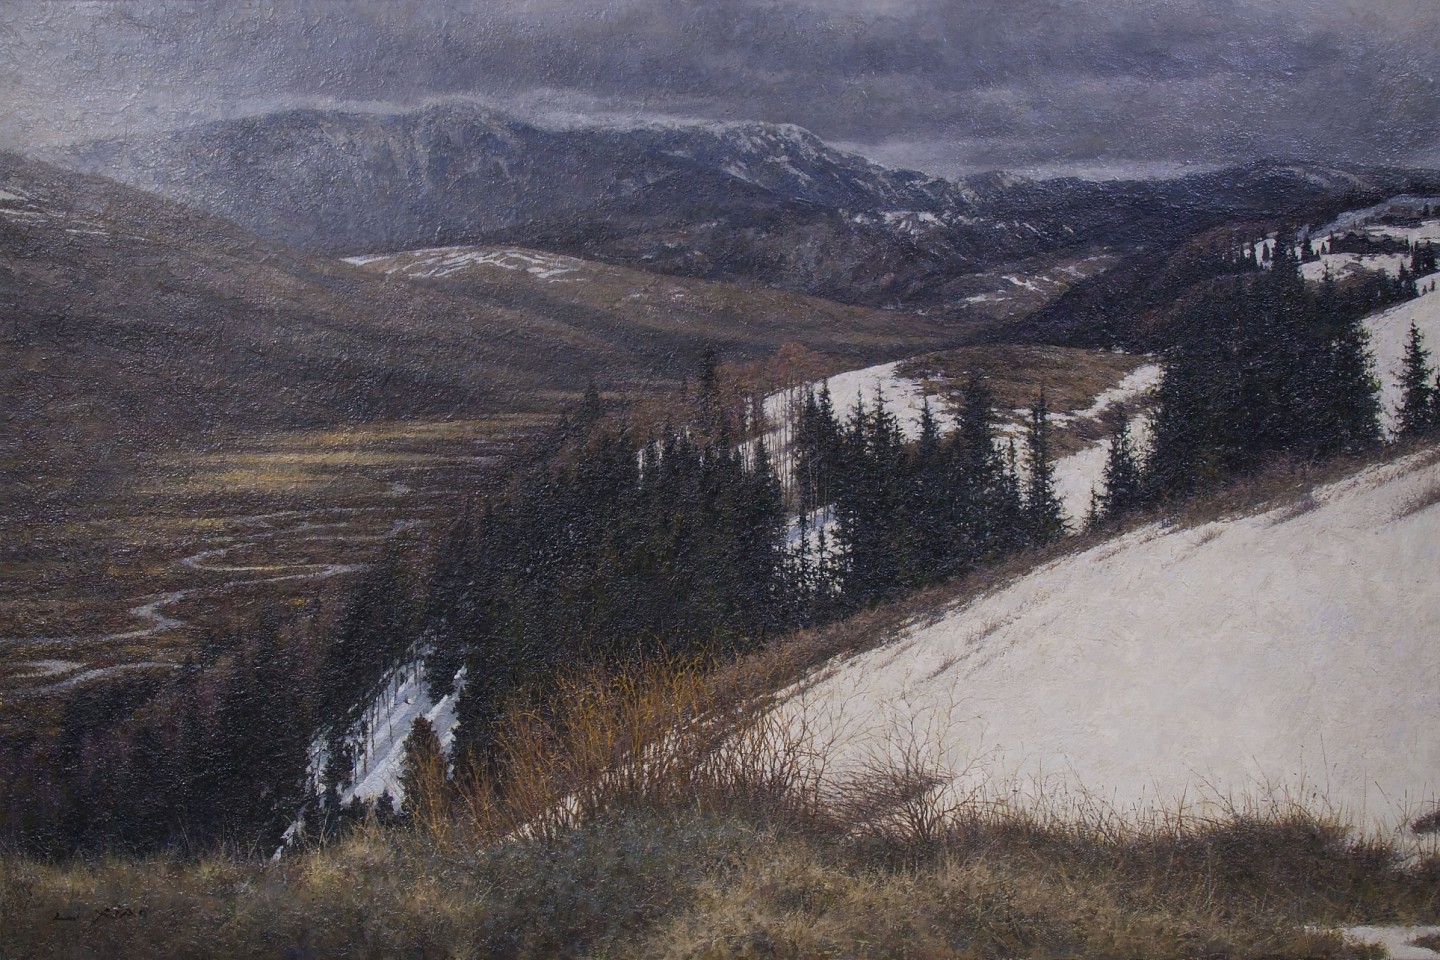 Li Xiao, Melting Snow, 2022
oil on canvas, 32 x 48 in.
LX042203